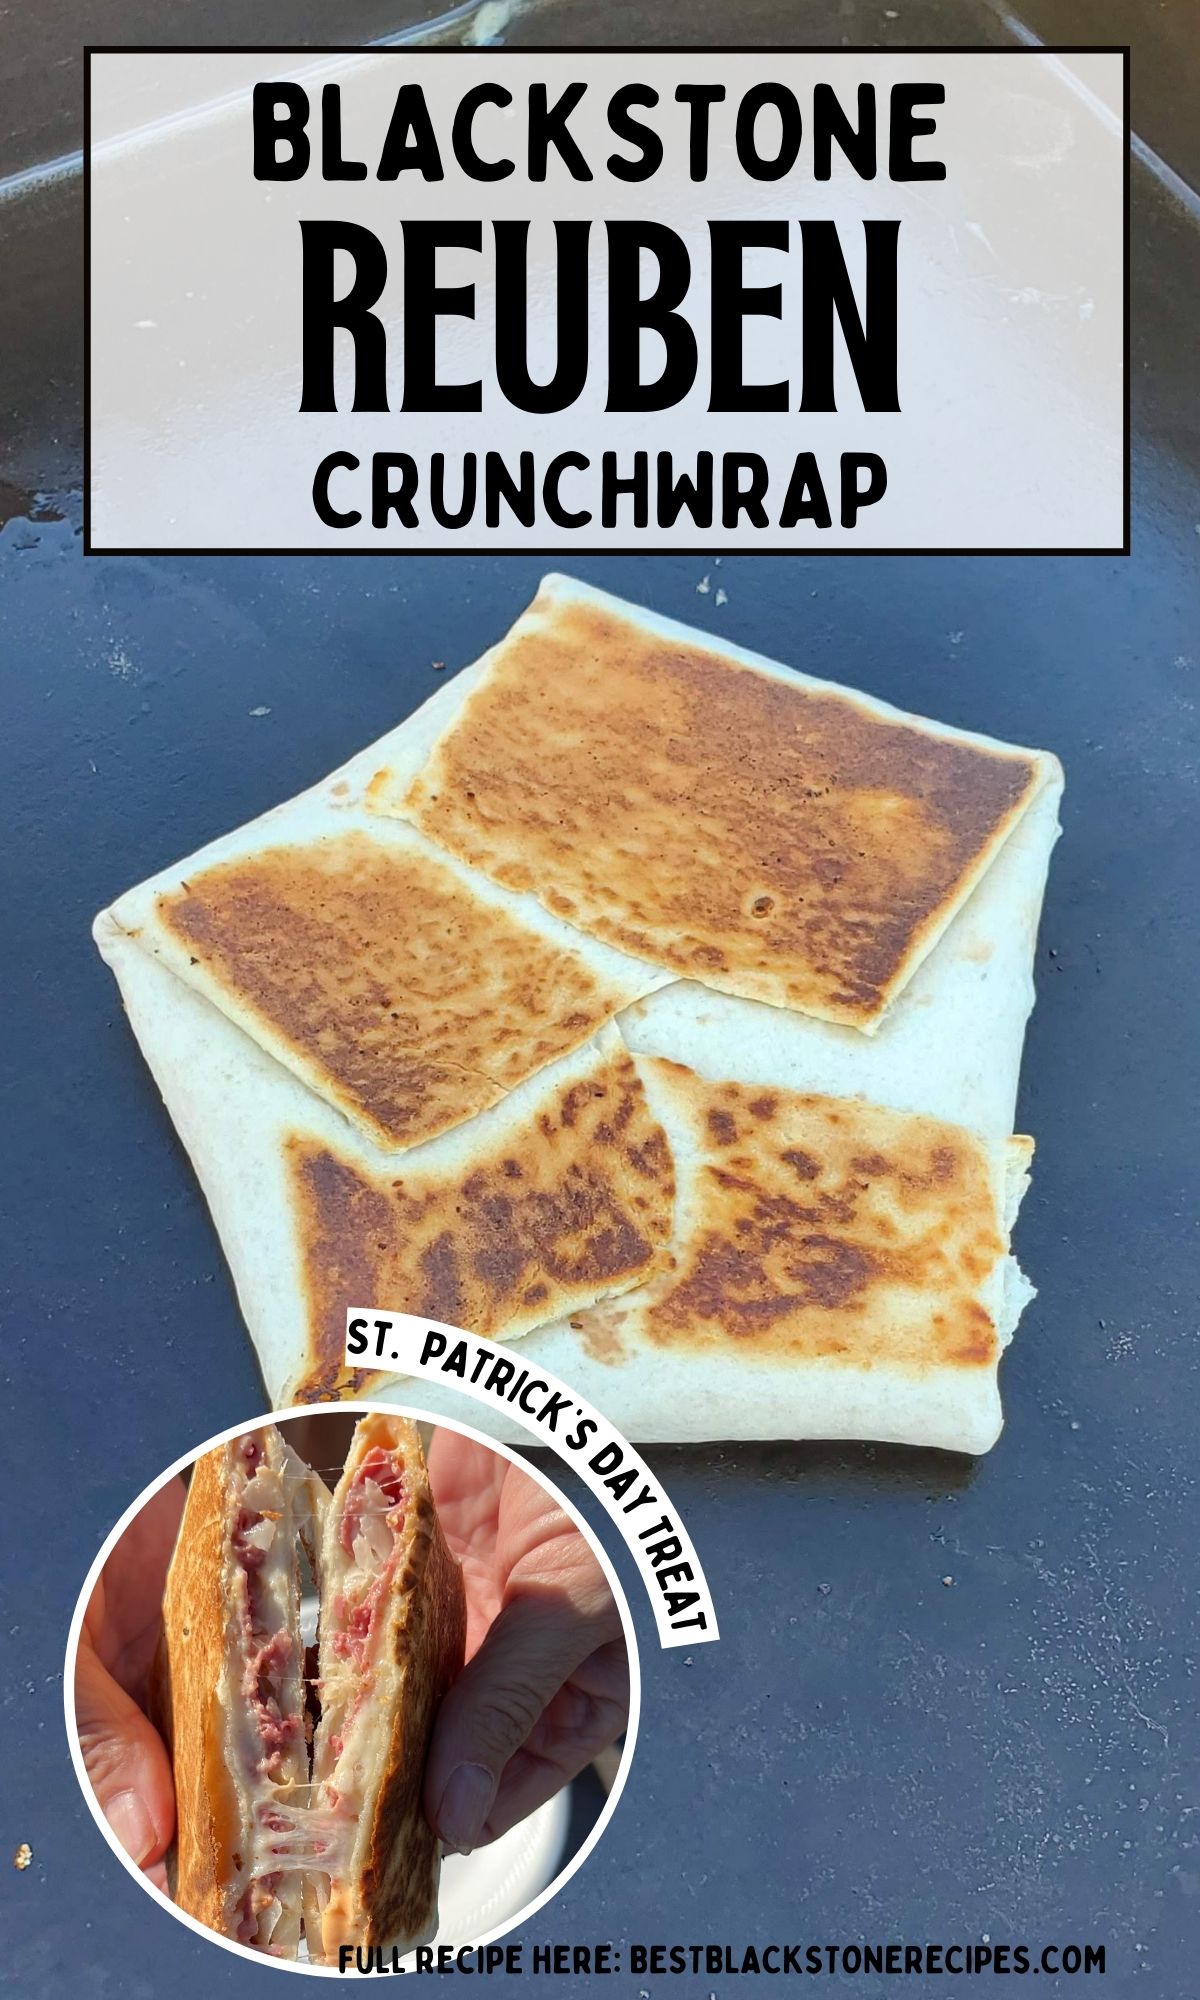 Grilled reuben crunchwrap presented as a st. patrick's day treat with a link to the recipe.